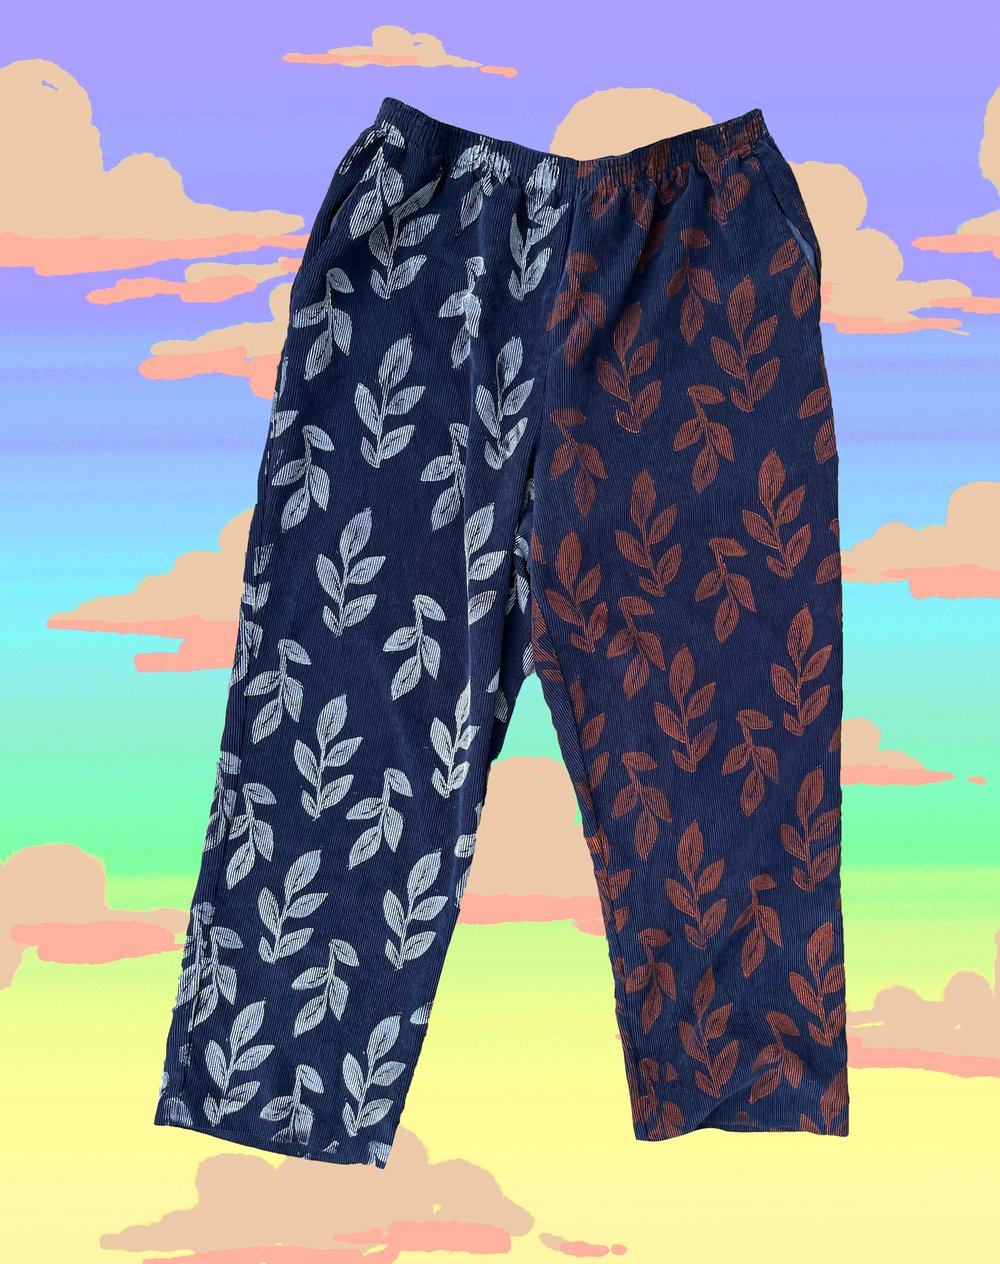 Image of Leafy Print Stretchy Pants- Sizes 14, 16P, and 18